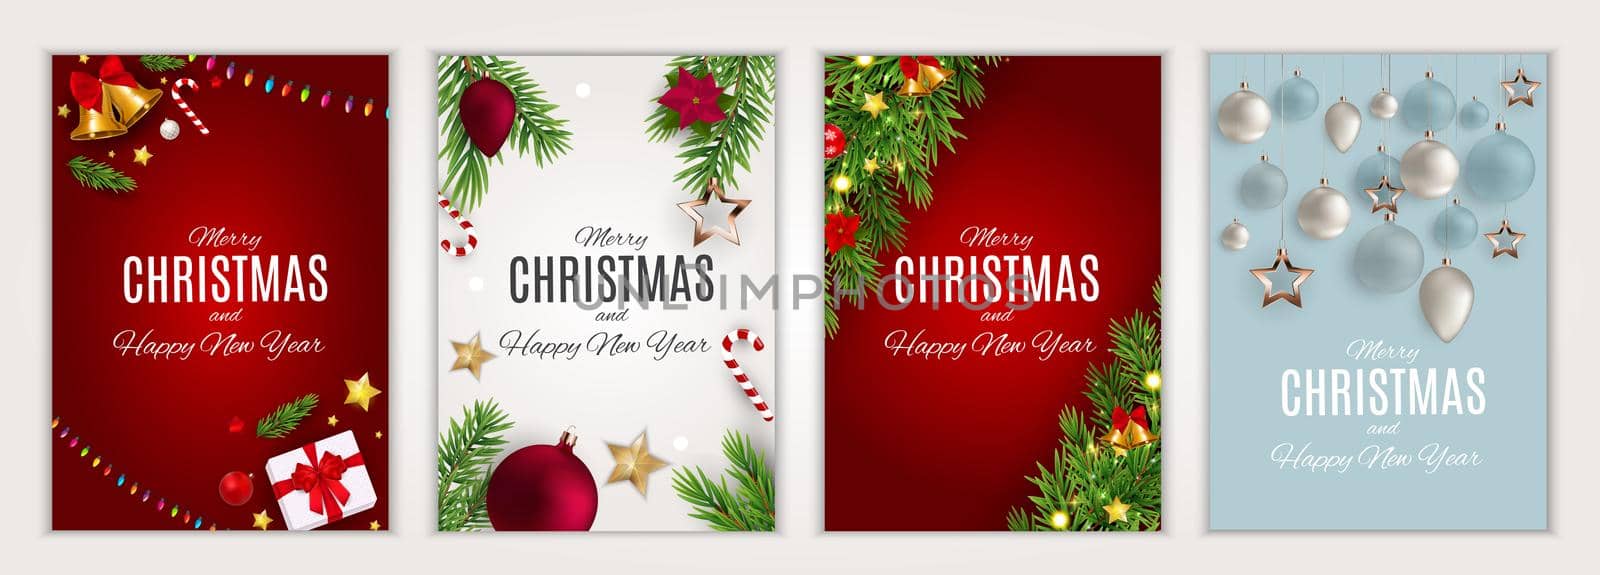 Merry Christmas and Happy New Year posters set. Vector illustration. EPS10